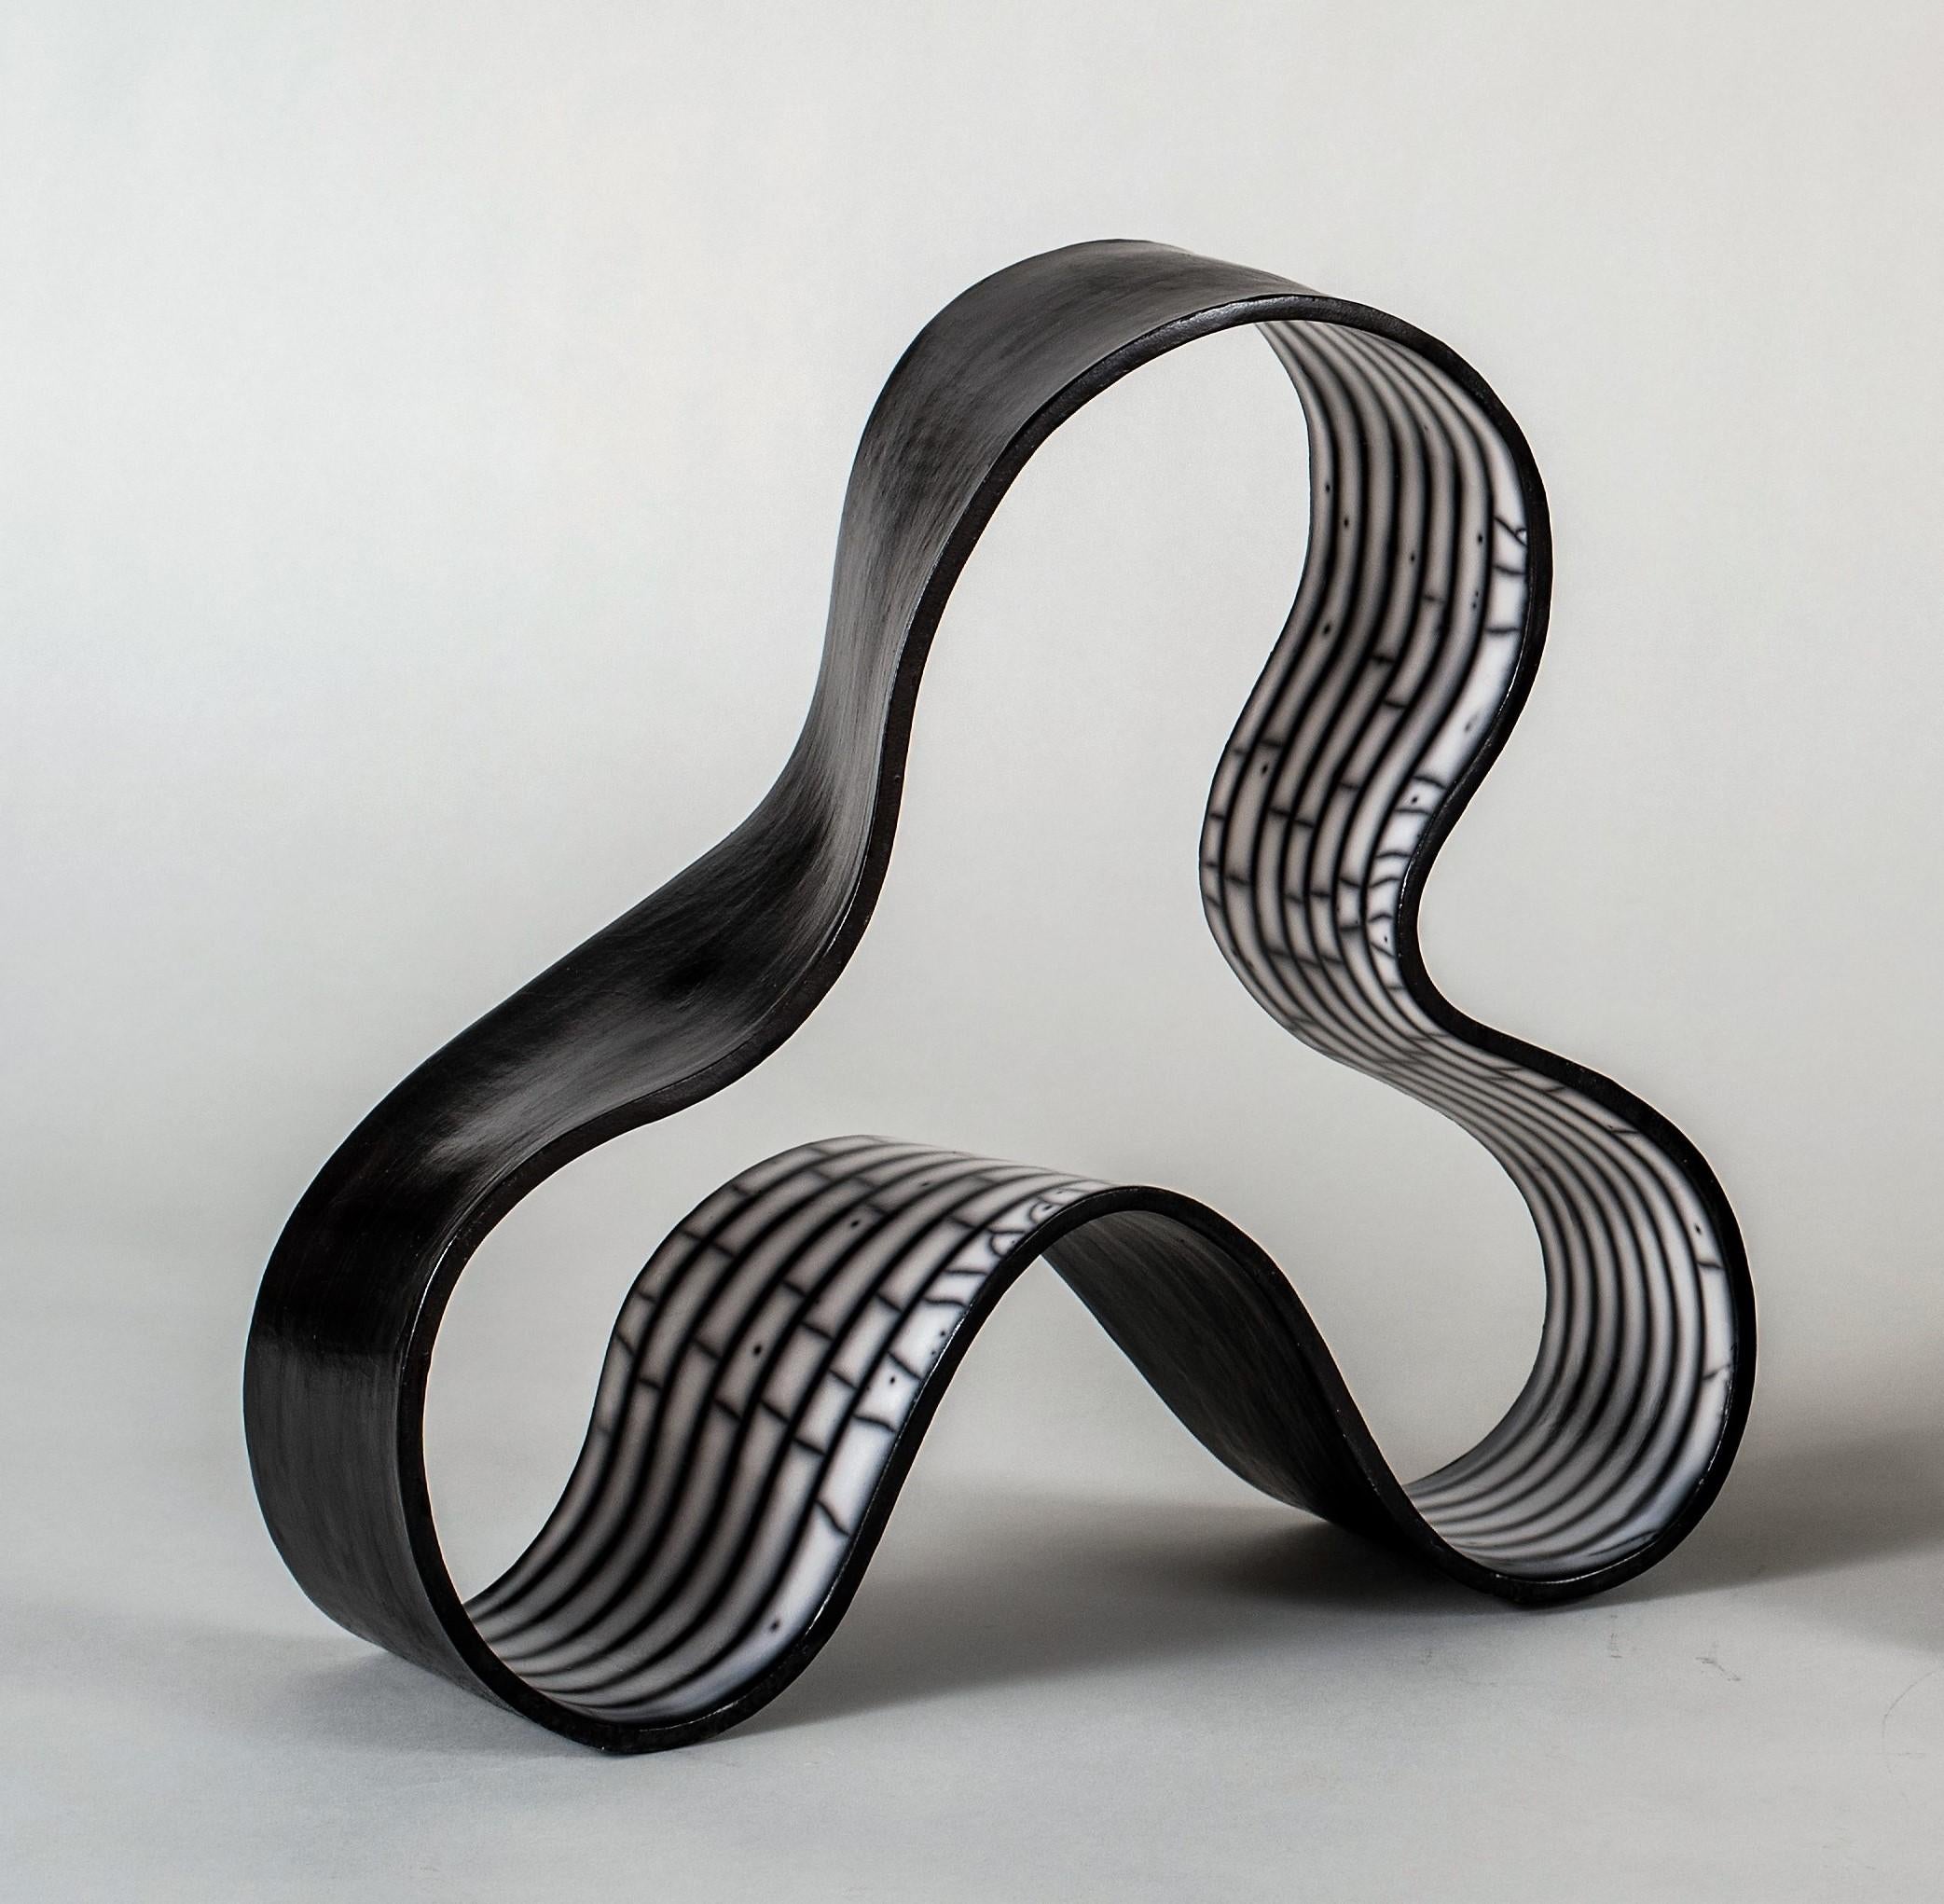 Other Contemporary Black and White Ceramic Sculpture For Sale